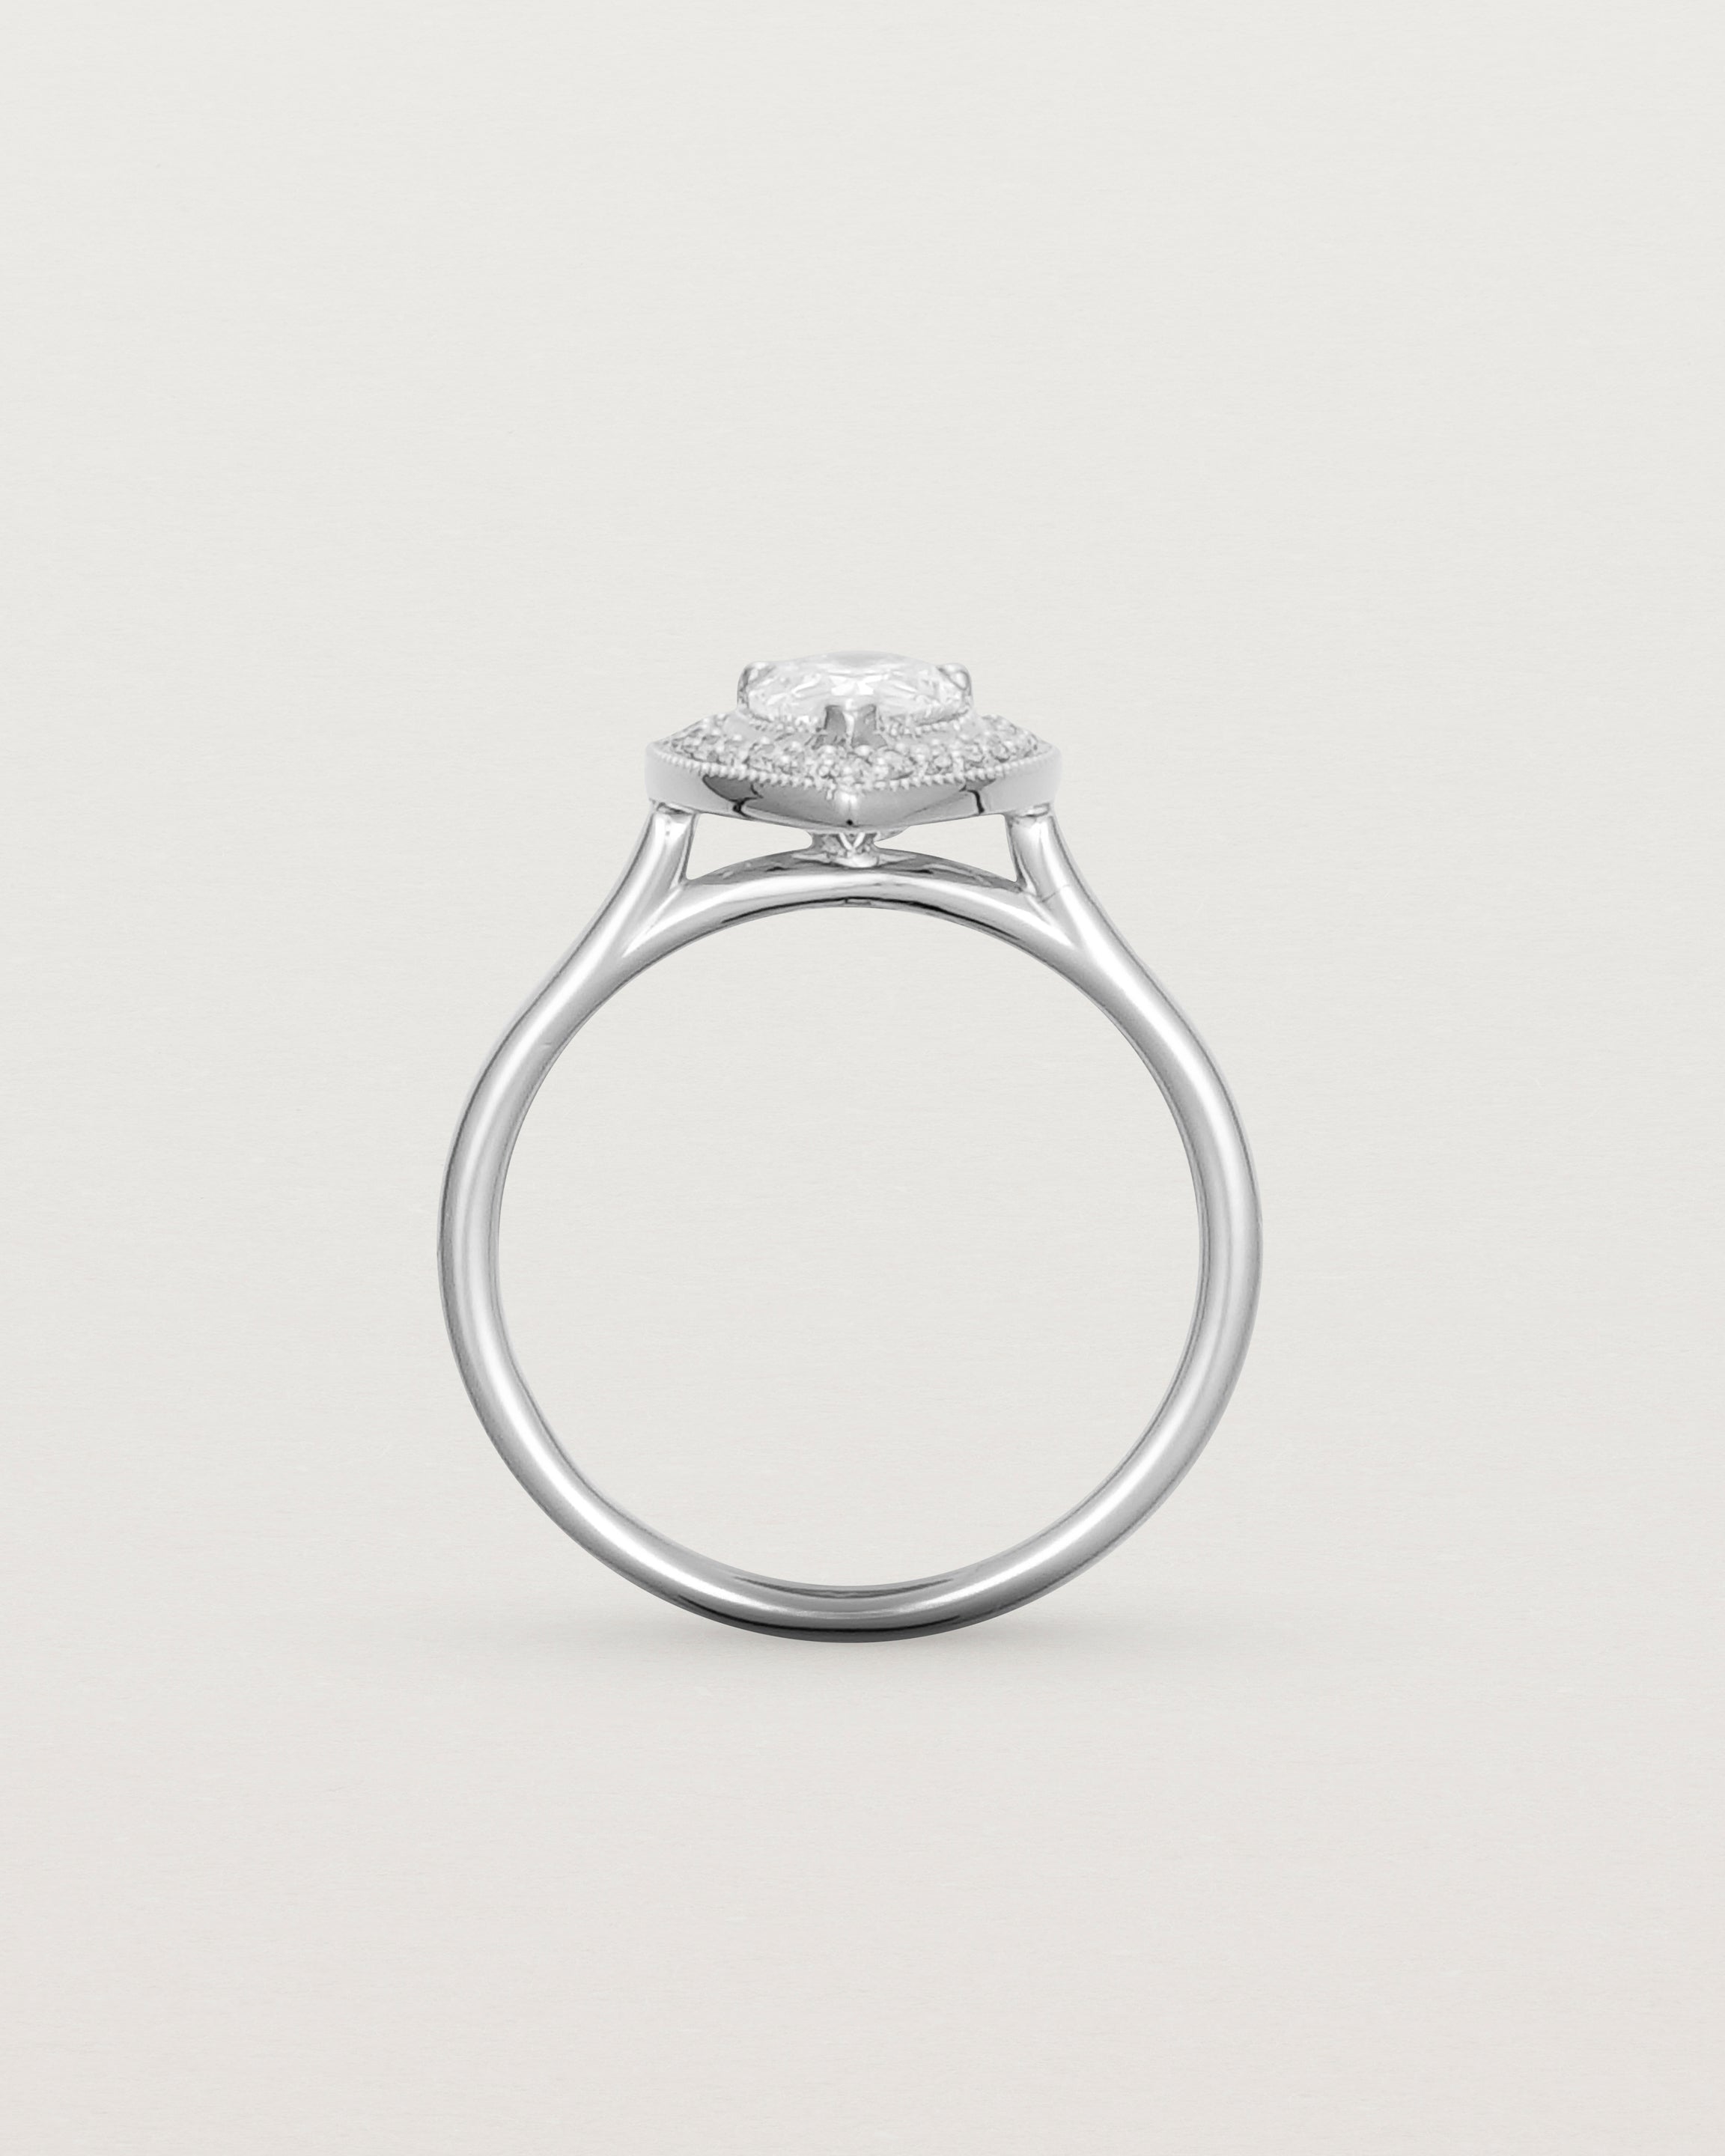 Standing view pear halo ring featuring a pear cut clear laboratory grown diamond and a halo of white diamonds in white gold